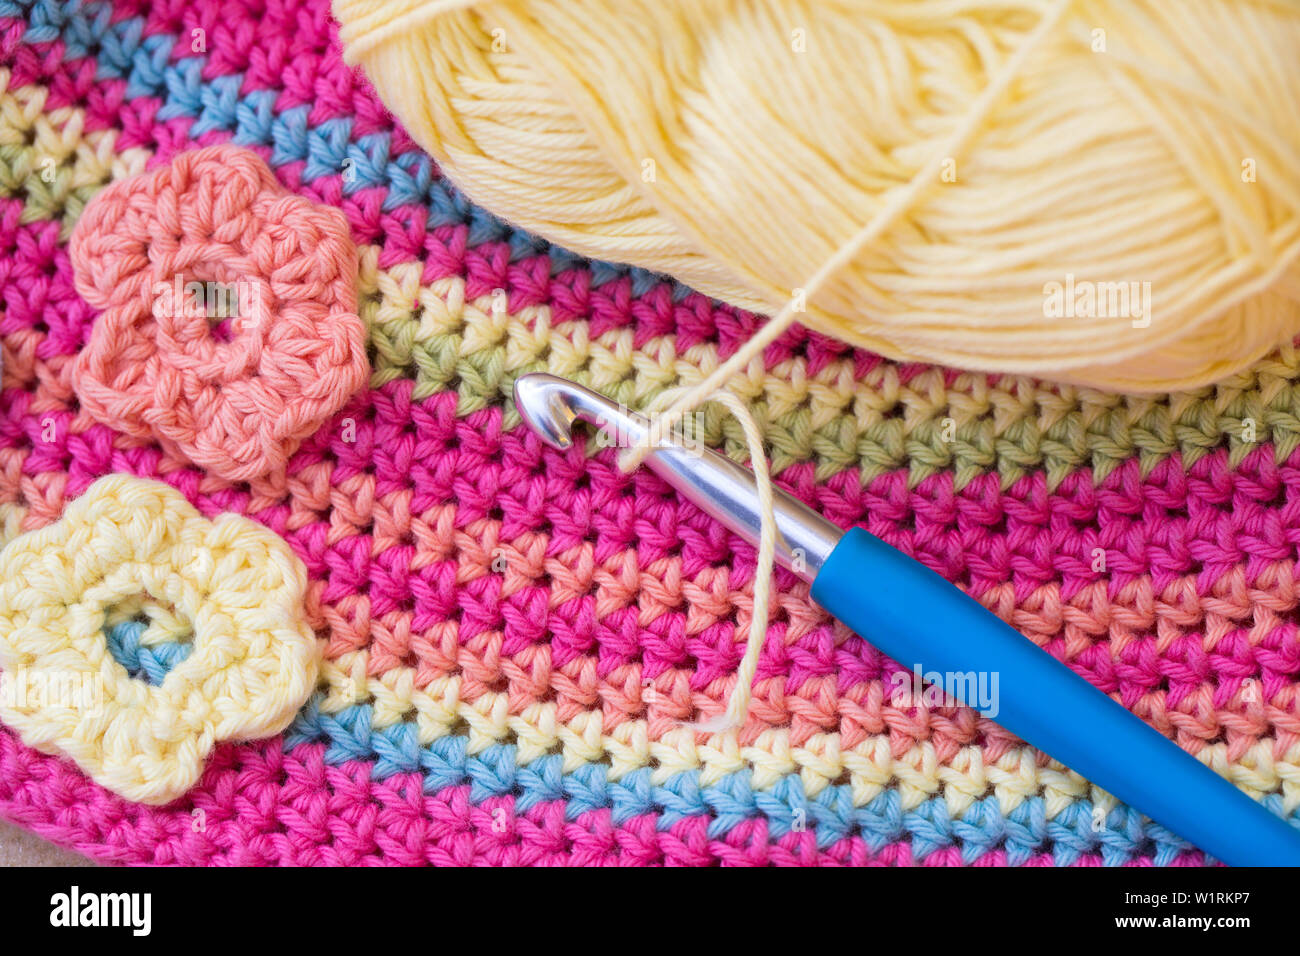 Crocheted colorful background with crochet hook and a wool ball Stock Photo